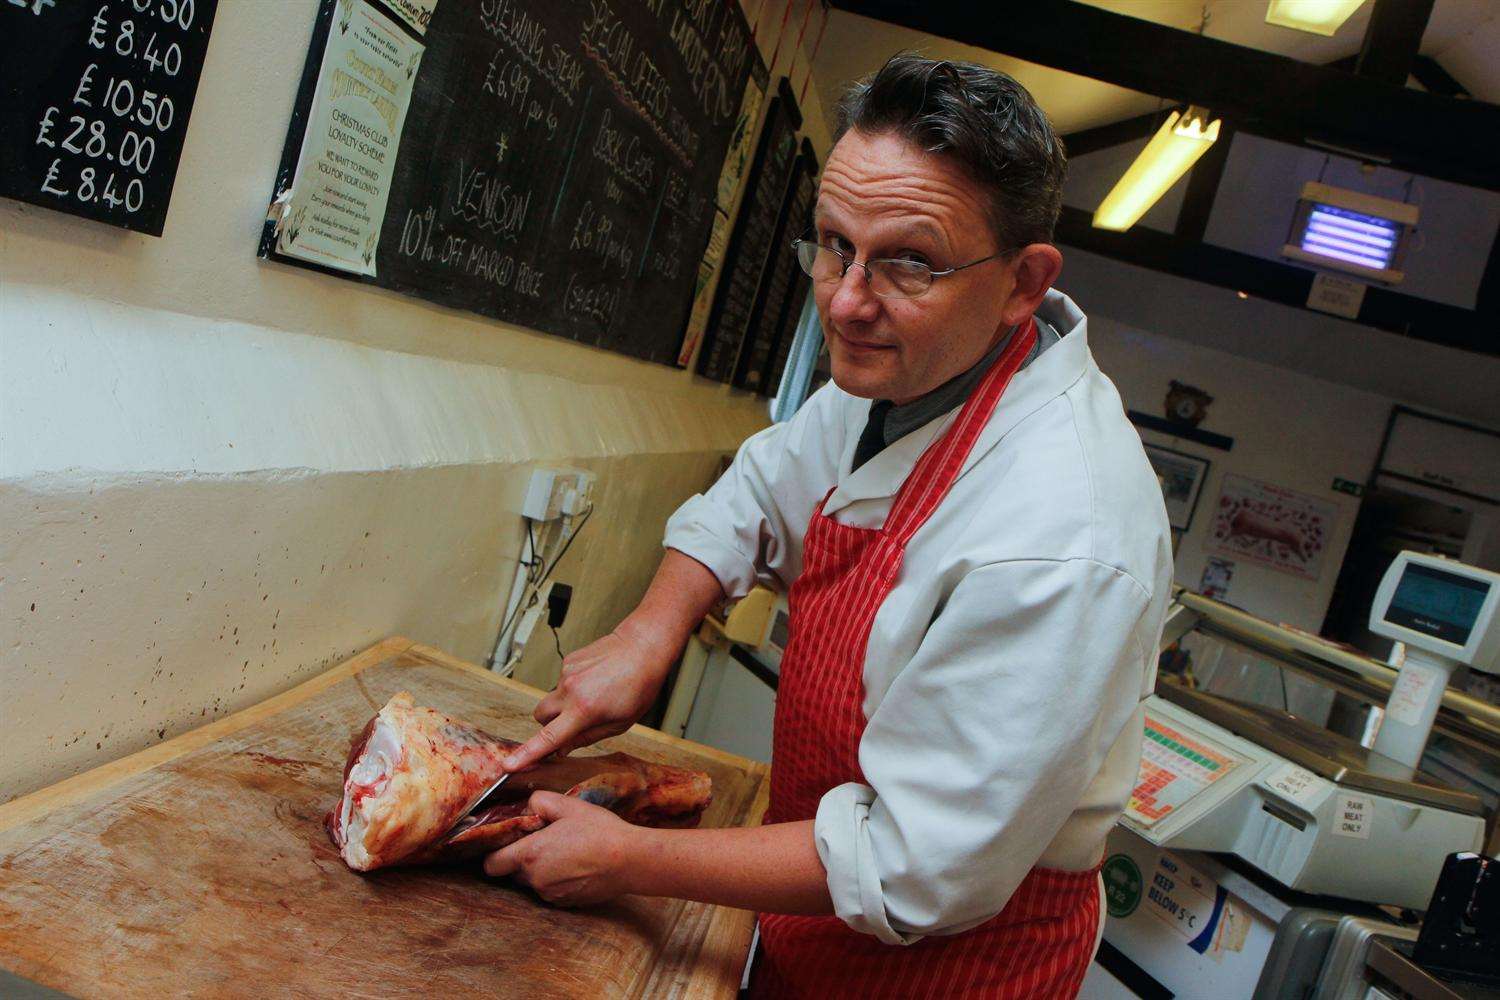 Will Reid, who chatbot Billy the Butcher will be based on, at work in Court Farm Butchery and Country Larder